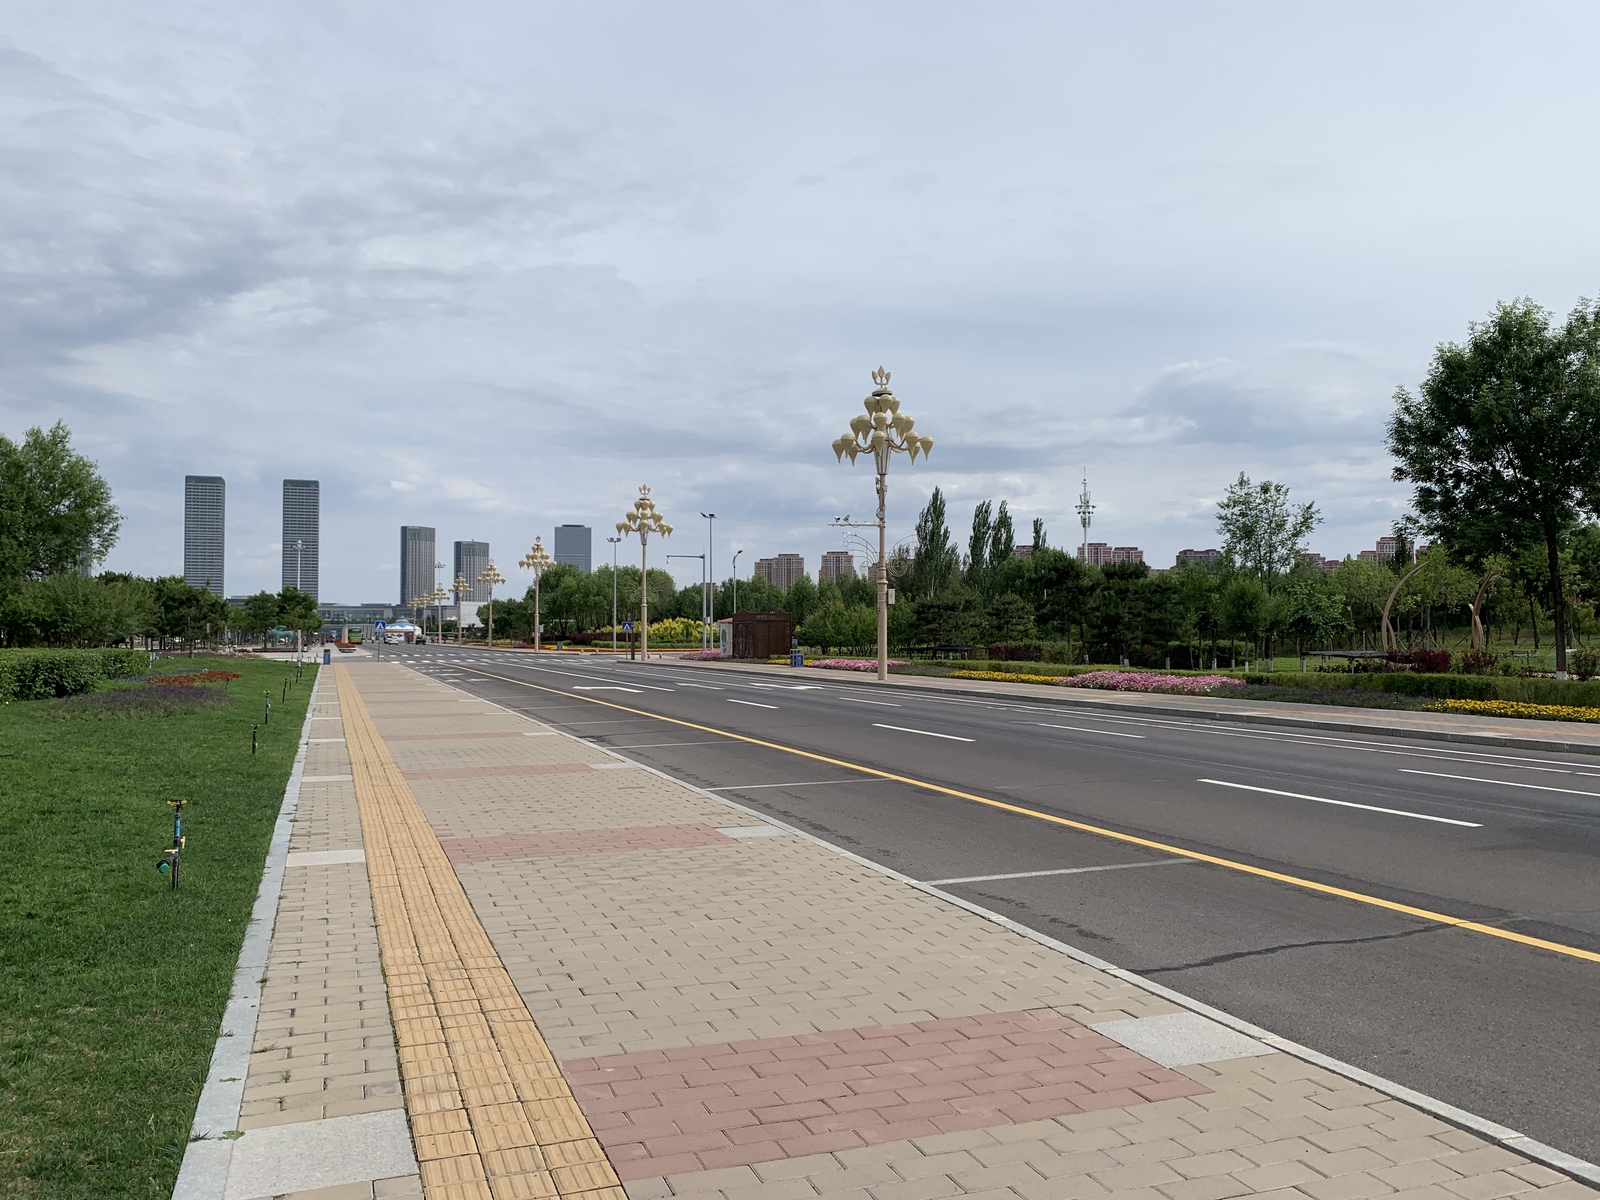 Ordos - a ghost town in China - My, China, Ordos, Deserted, Призрак, Why, Longpost